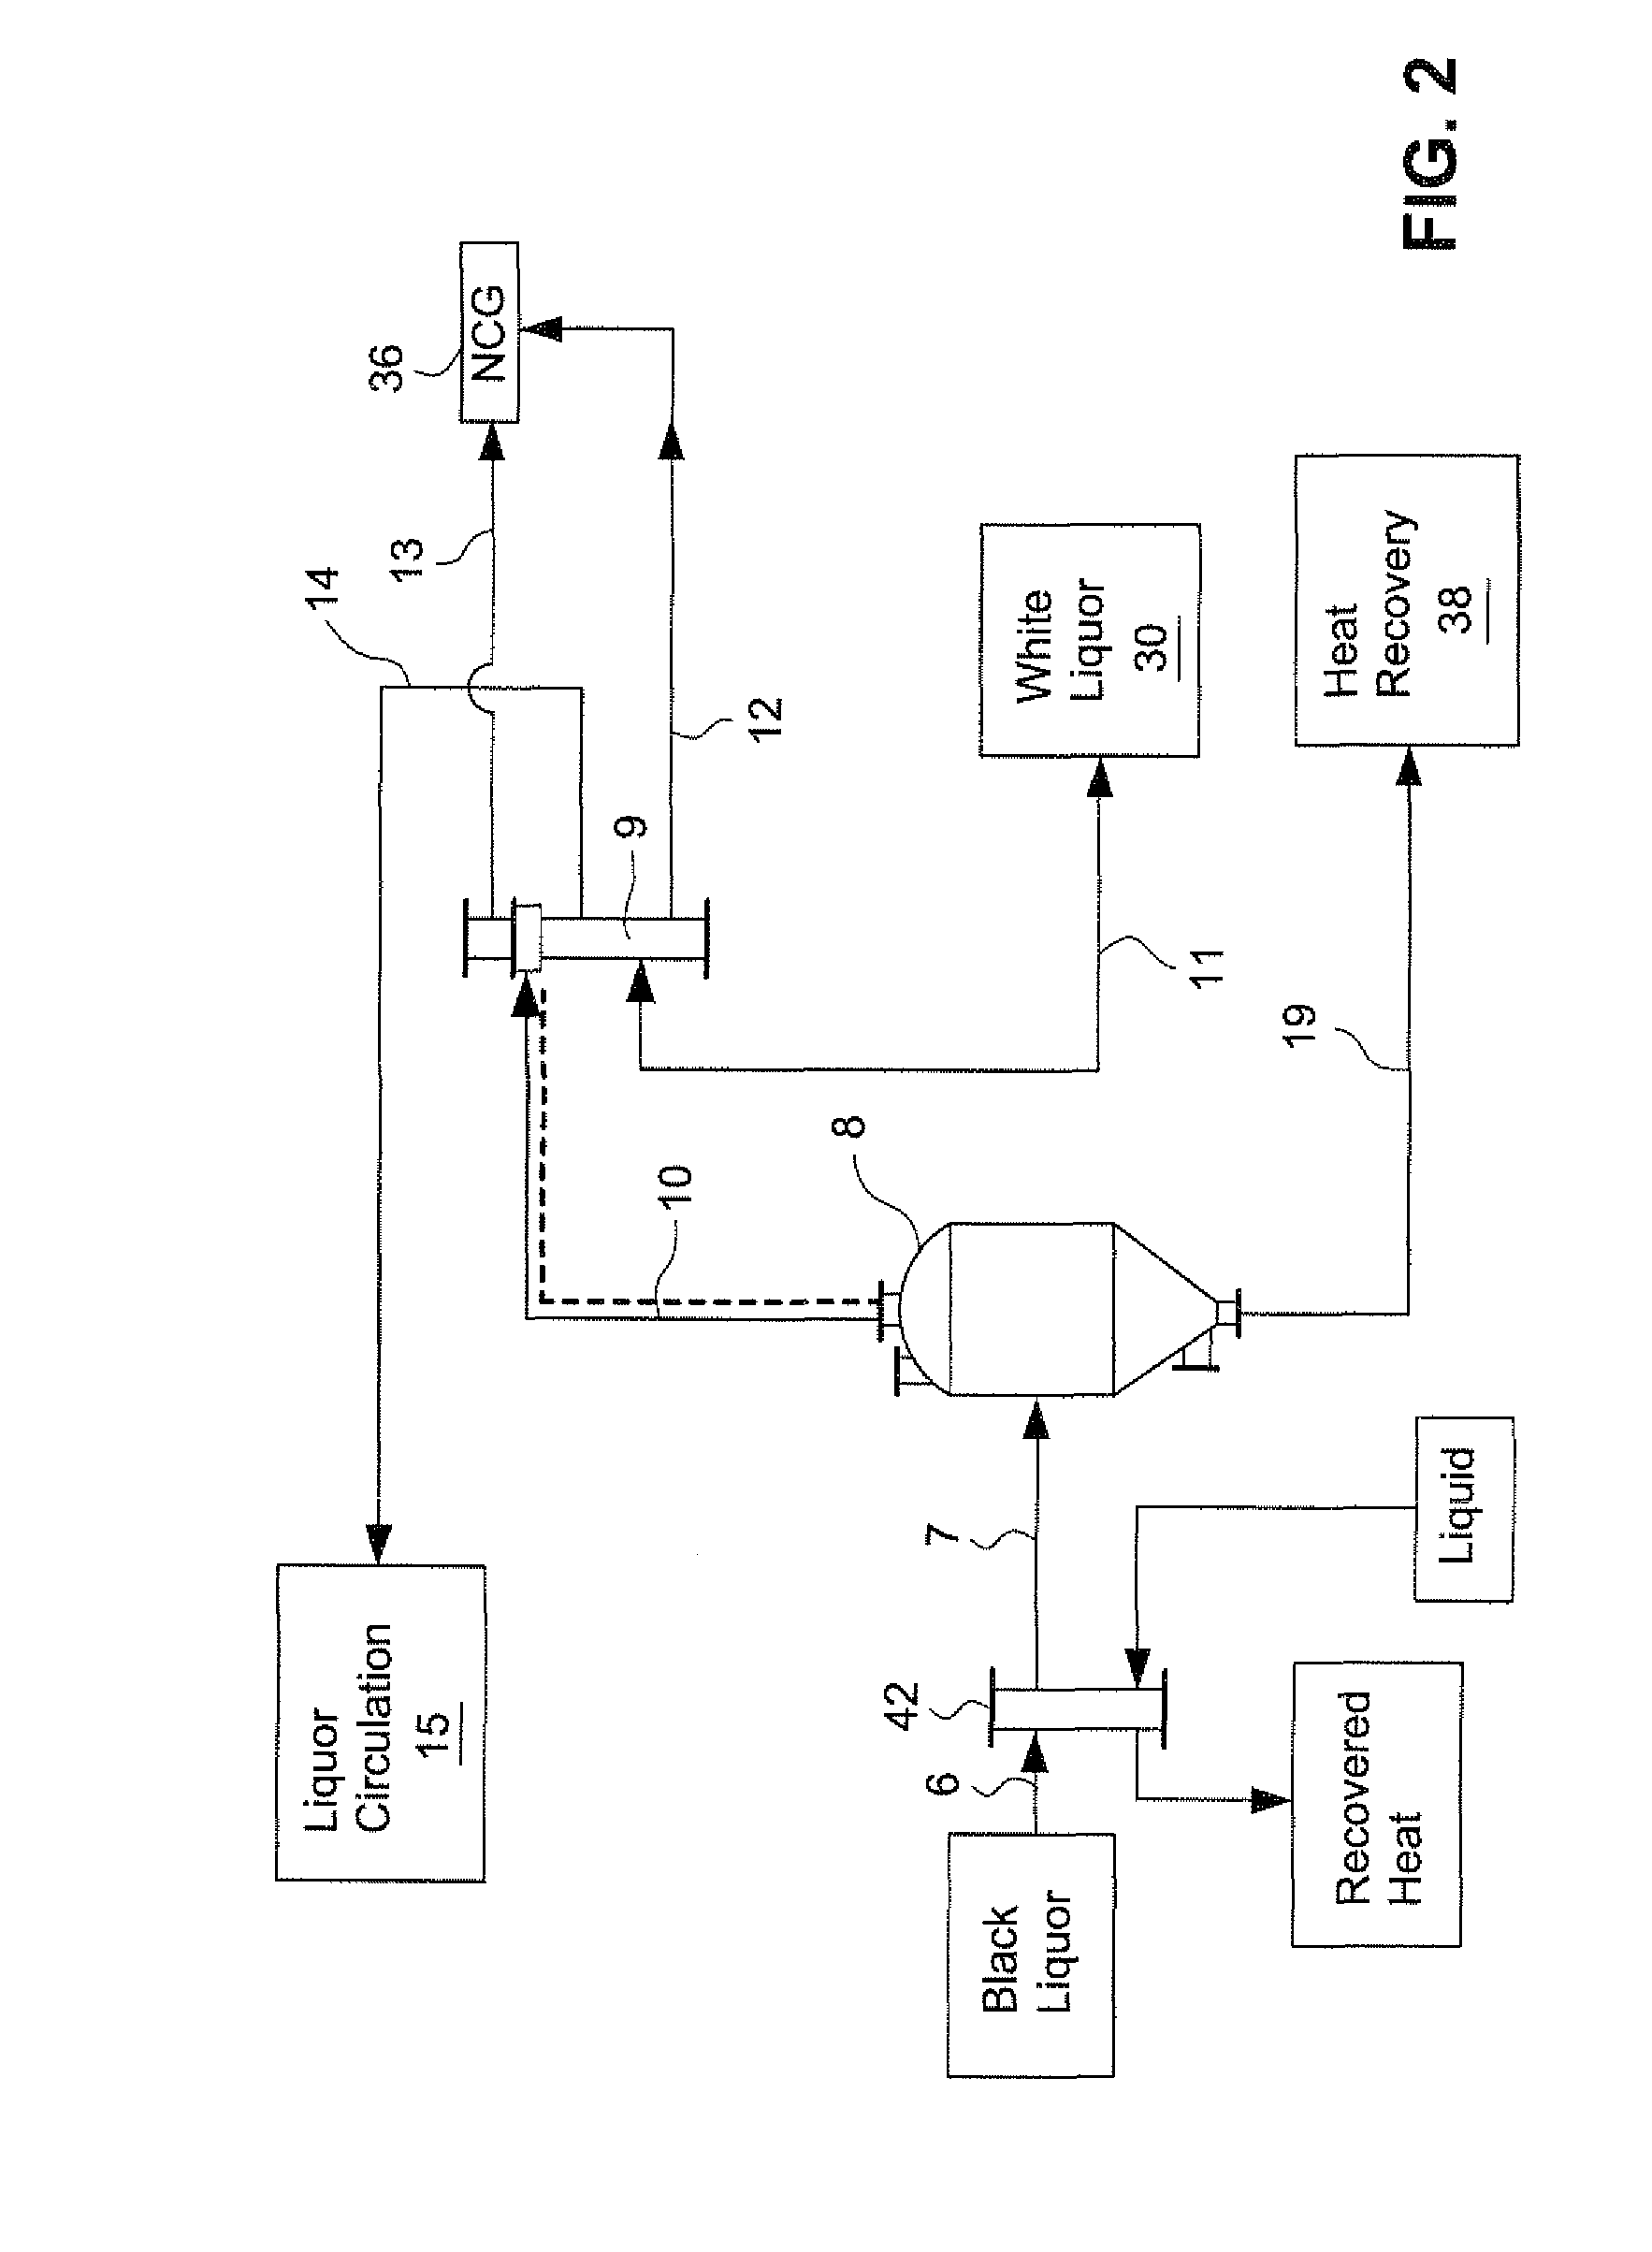 Heat recovery from spent cooking liquor in a digester plant of a chemical pulp mill